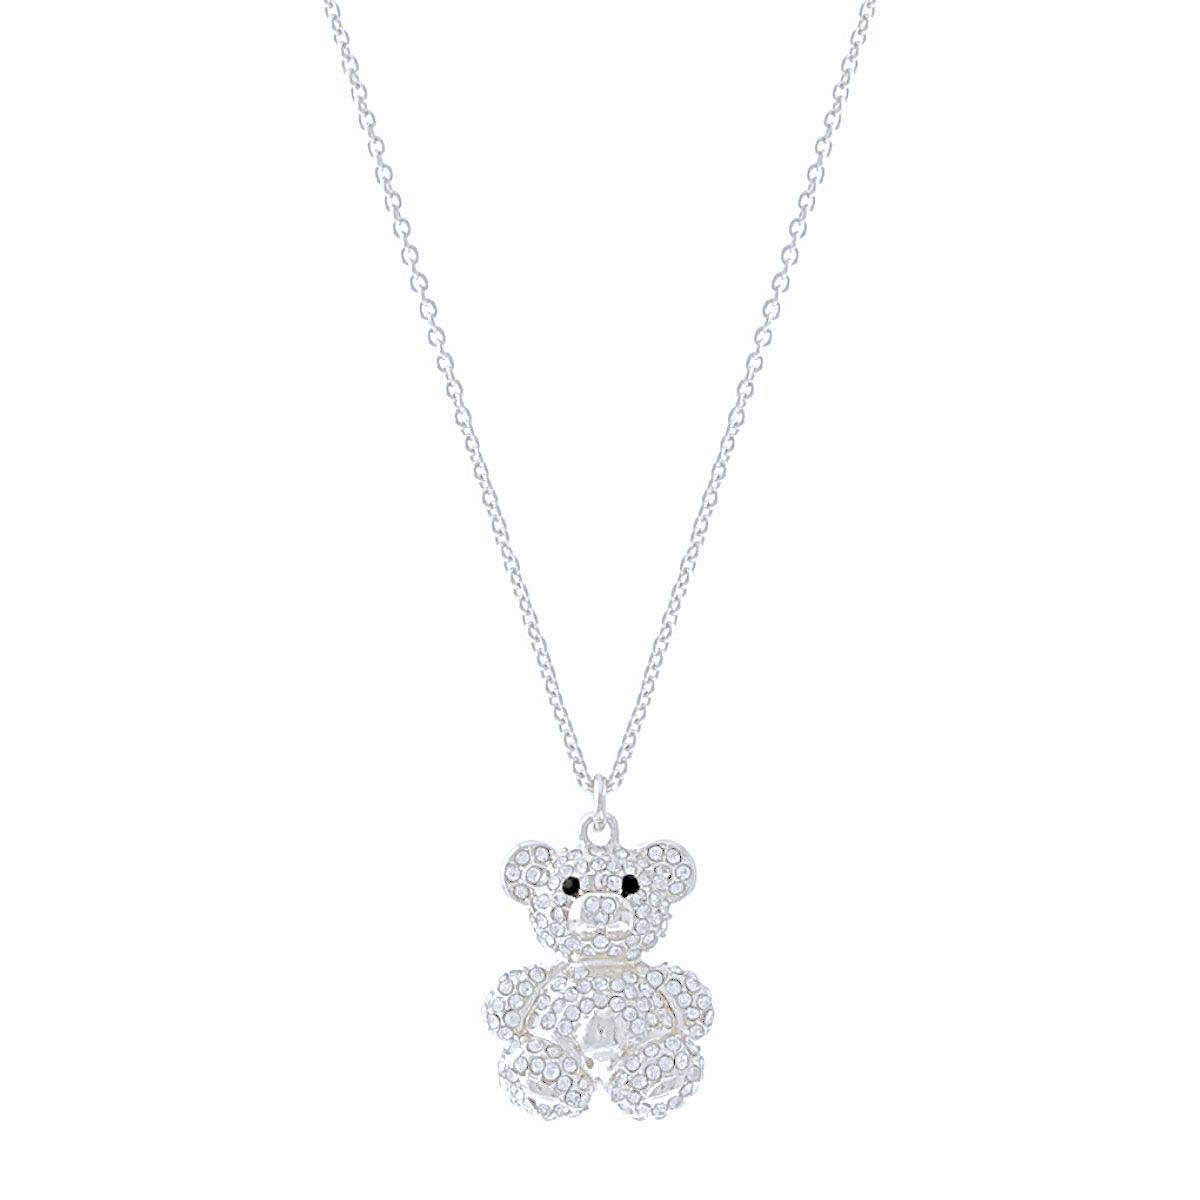 Get Cute with a Silver Teddy Bear Necklace - Perfect Shine & Style for Women